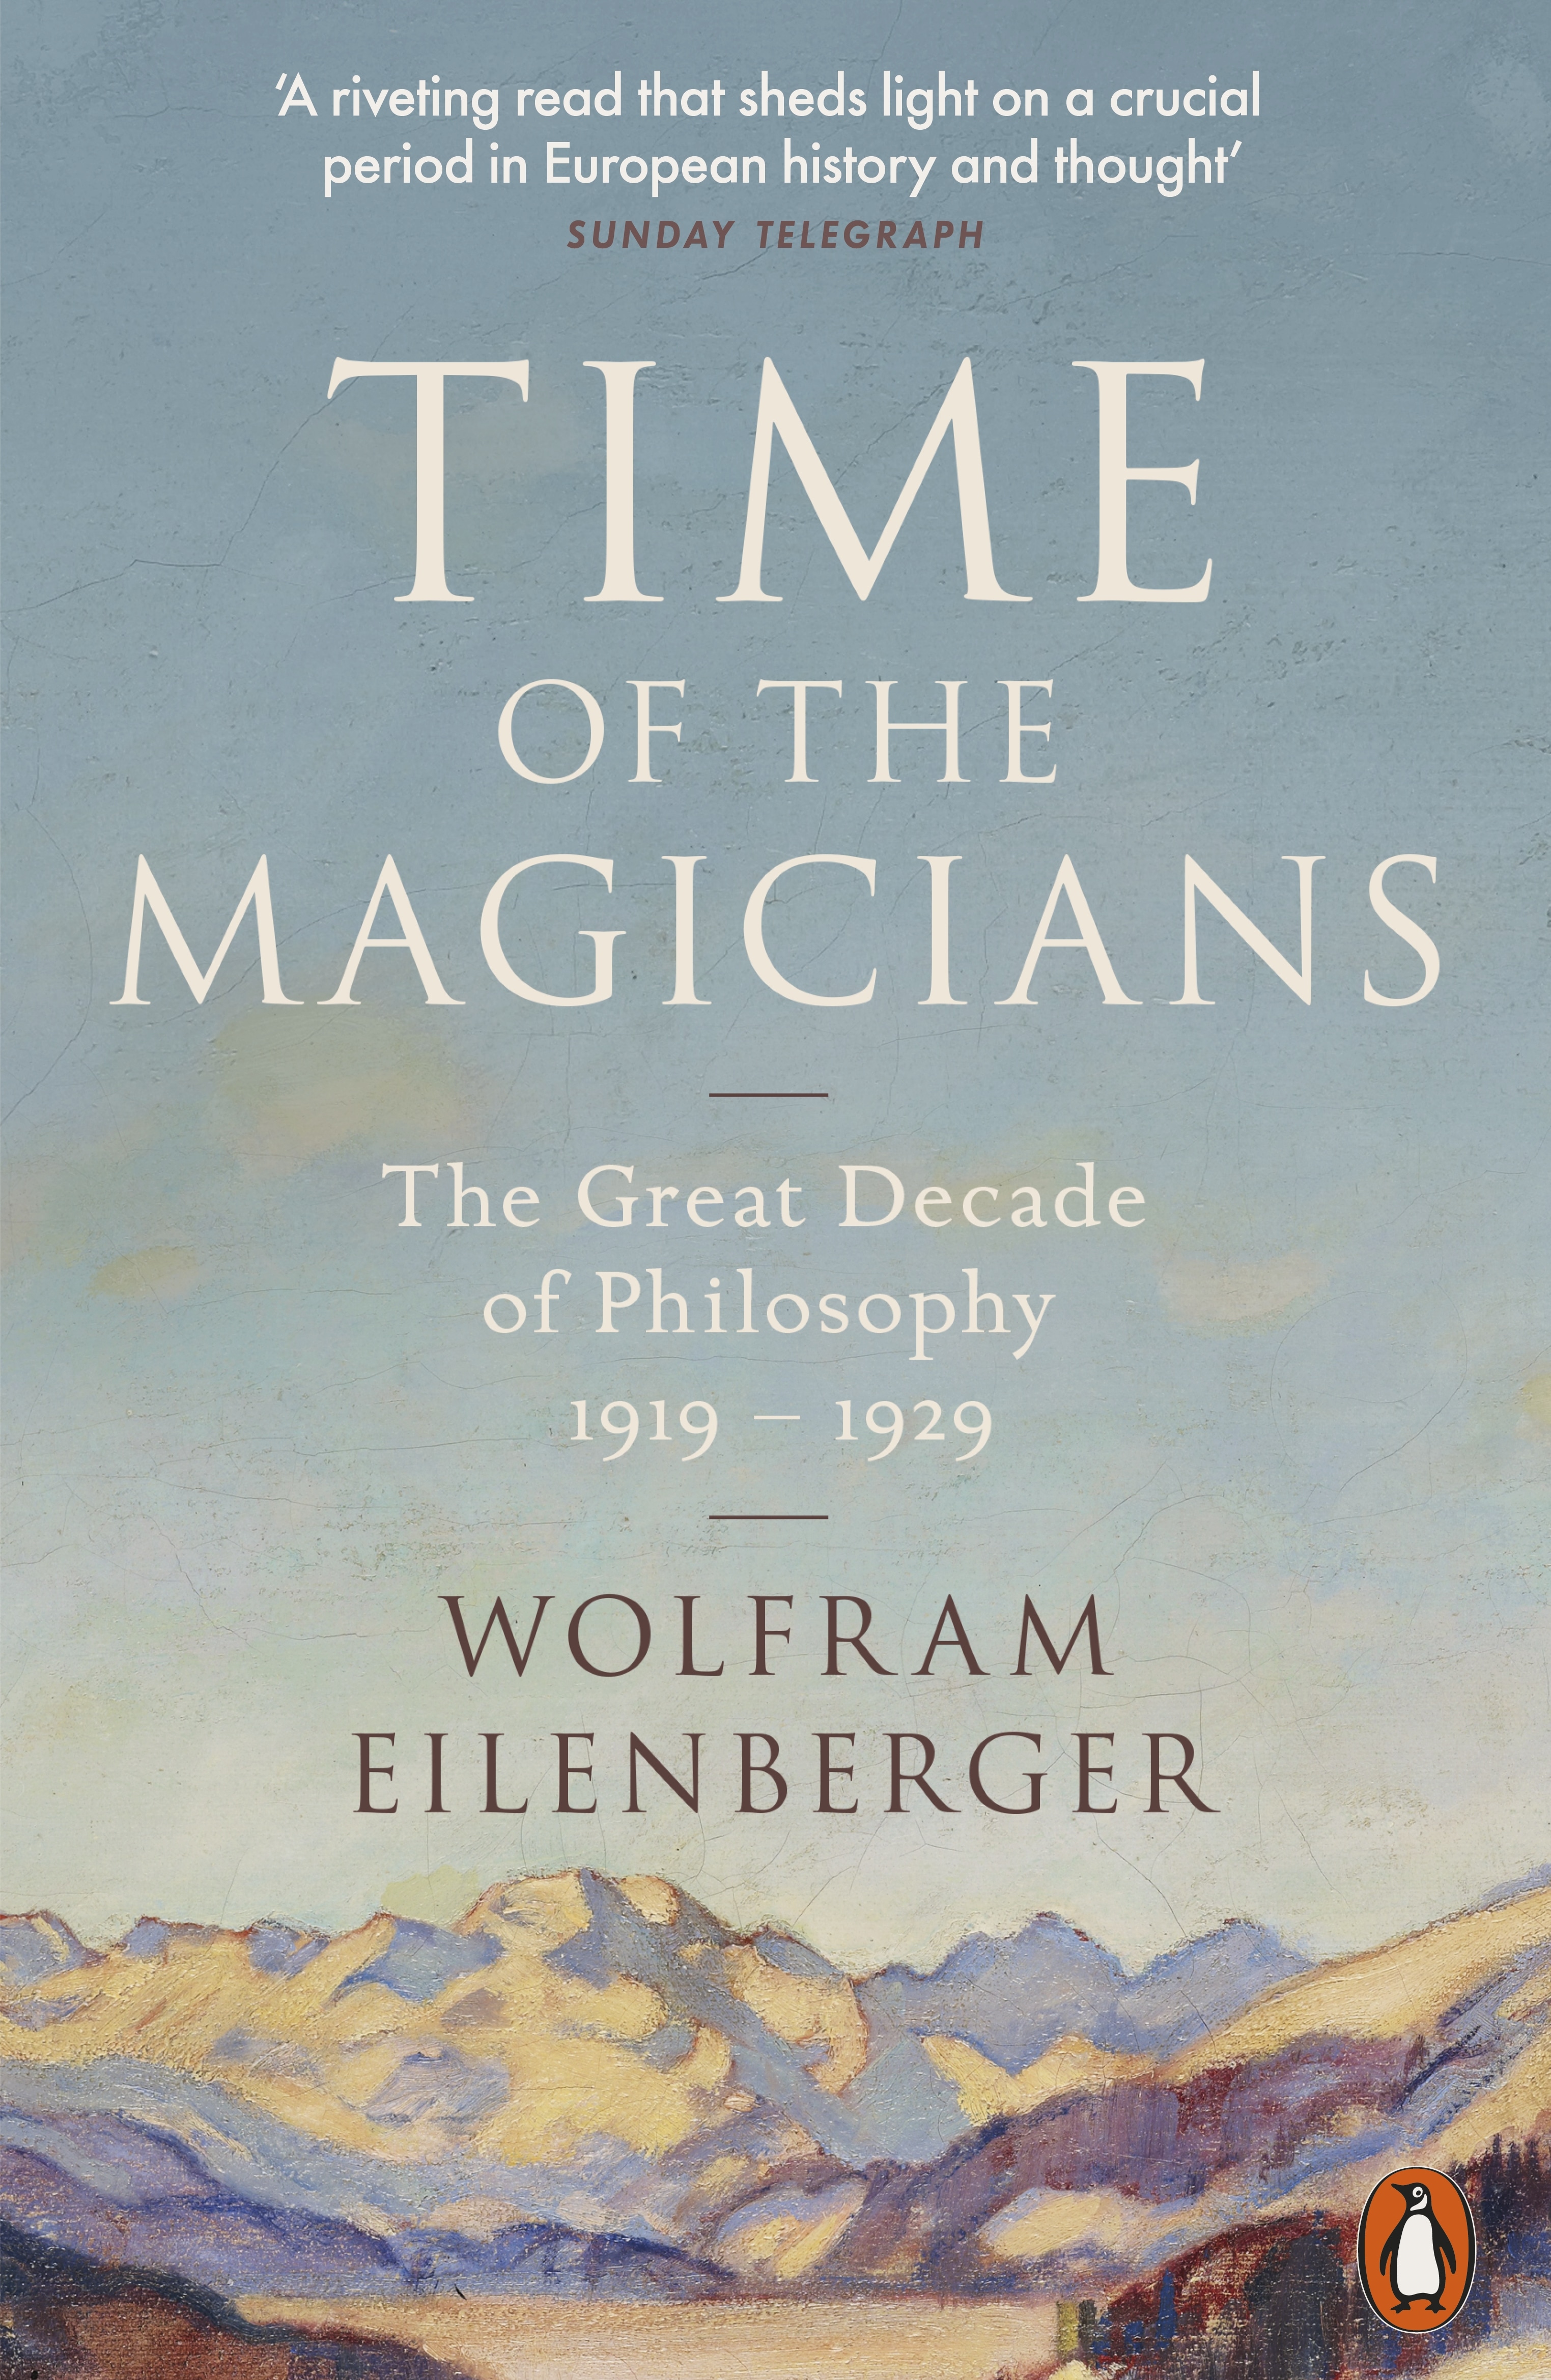 Book “Time of the Magicians” by Wolfram Eilenberger — February 24, 2022